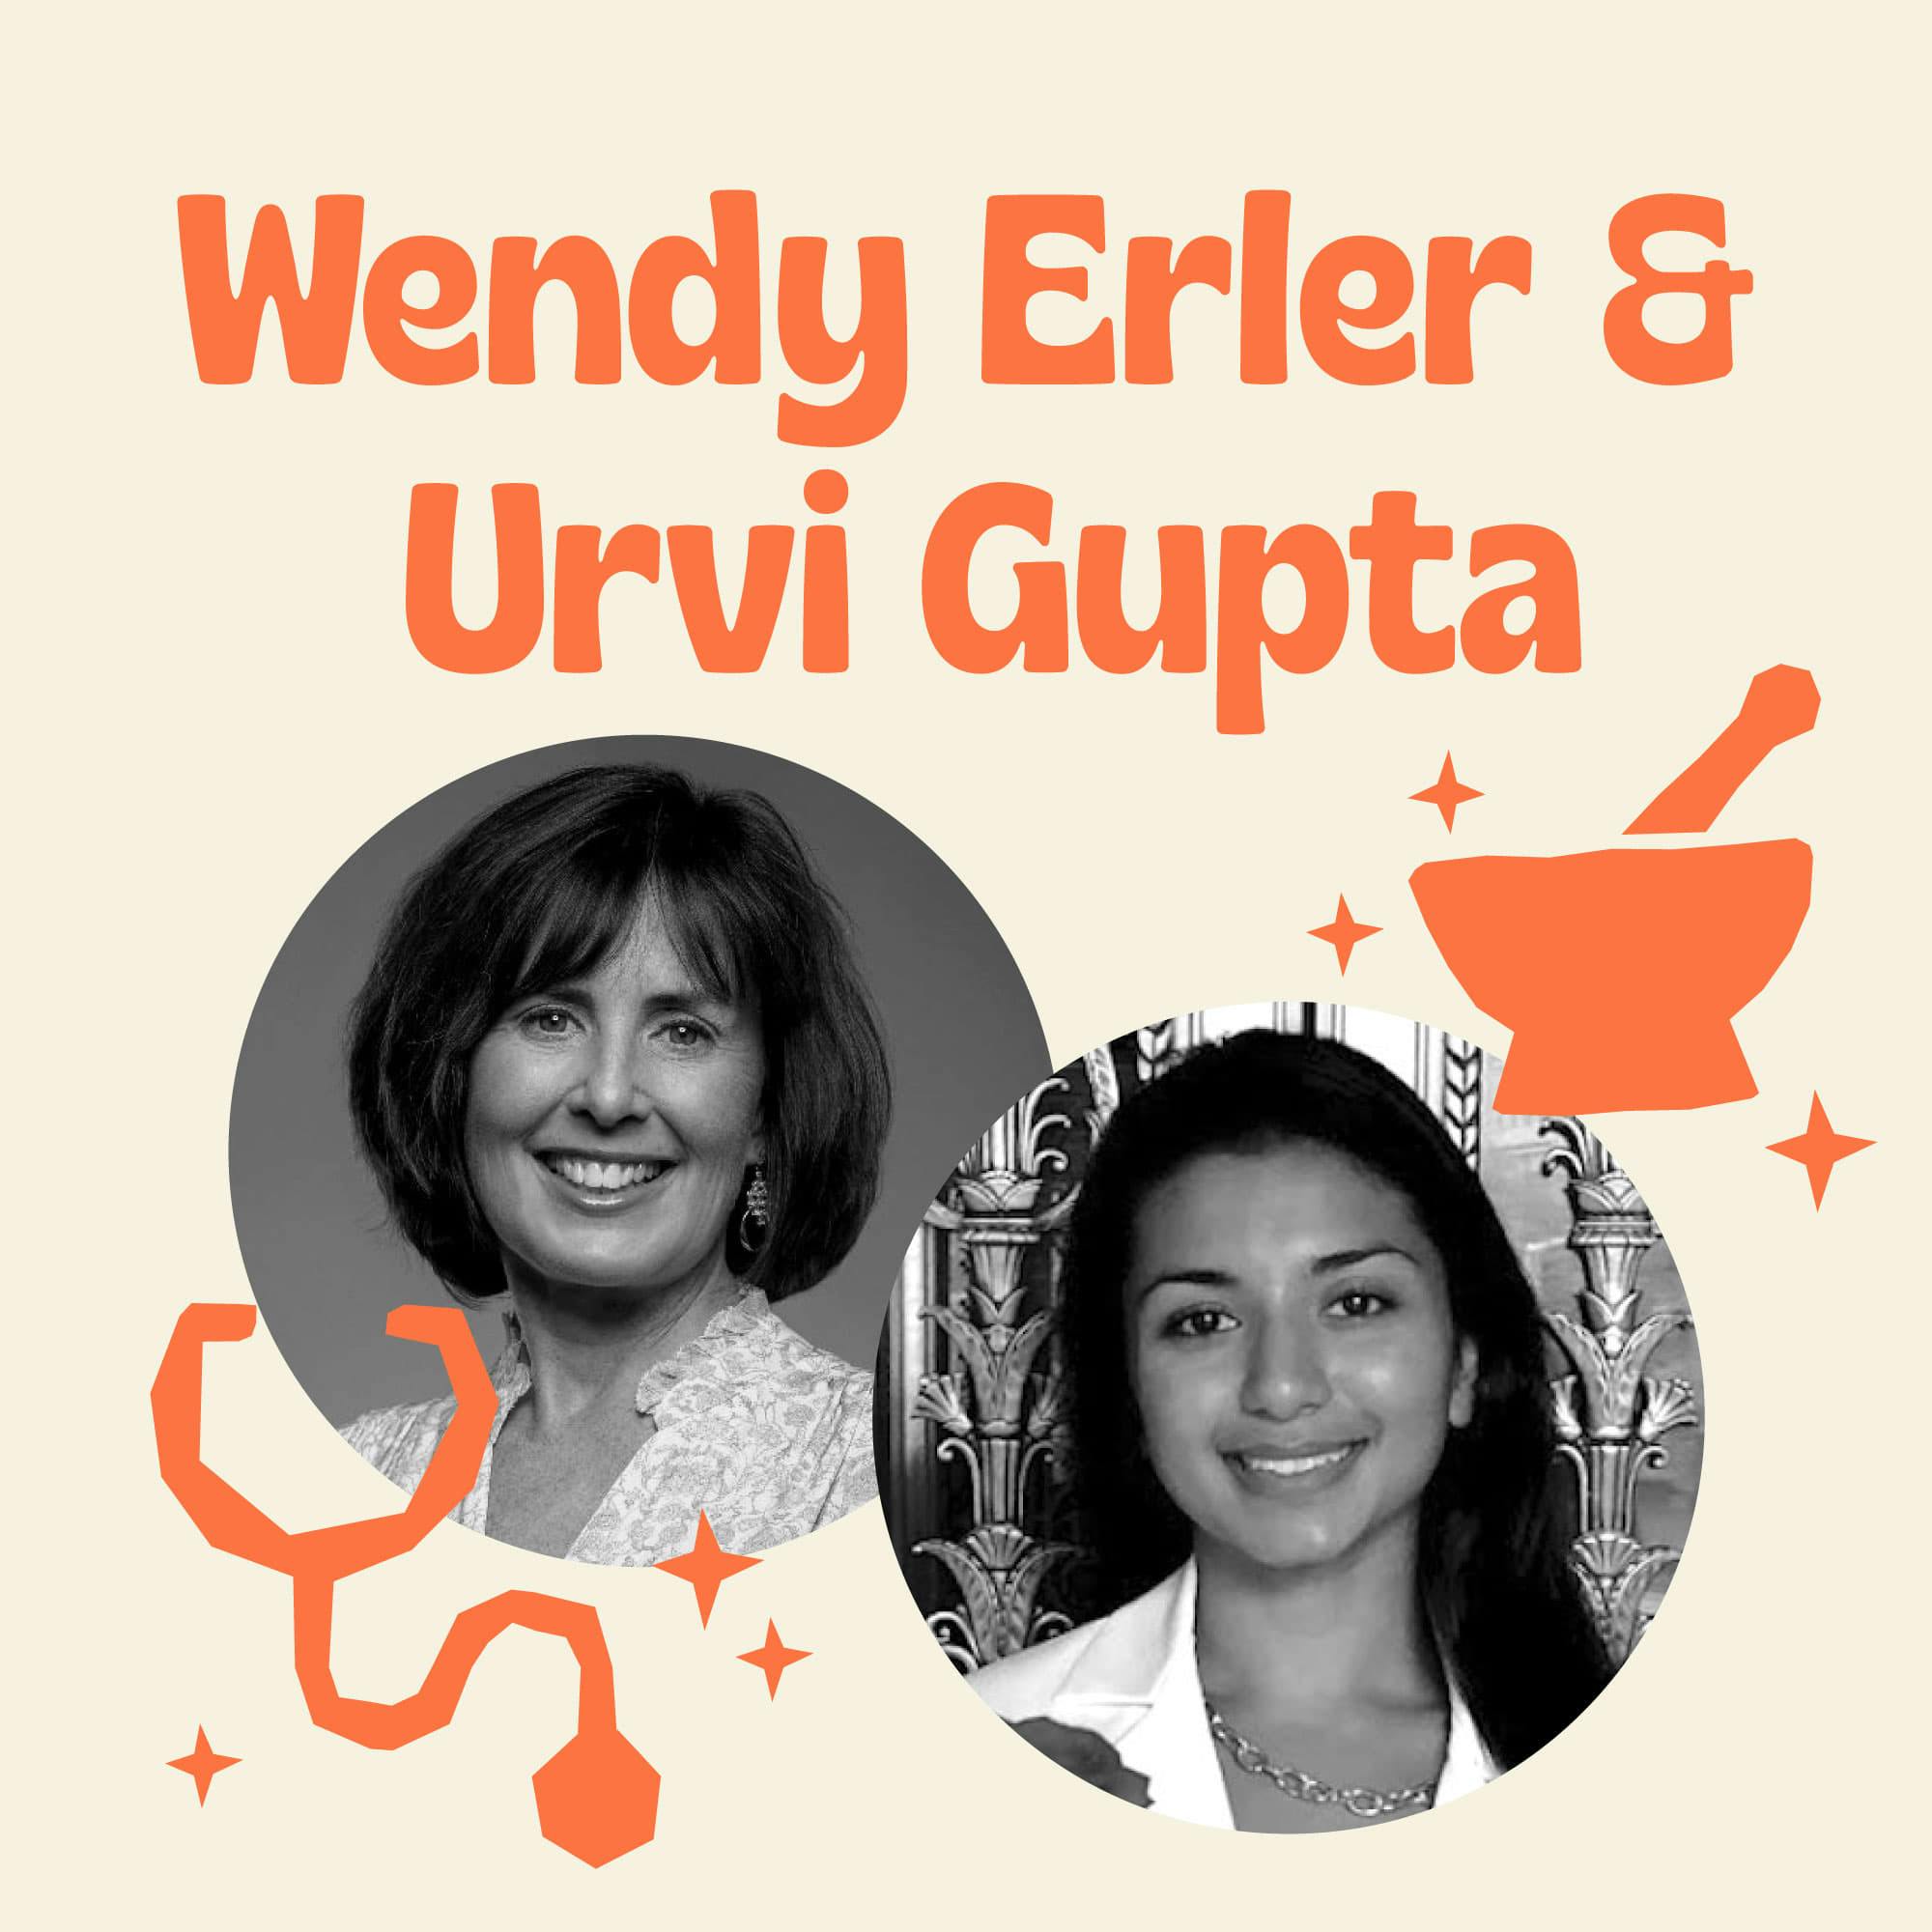 Medical Student – Urvi Gupta Joins the Global Genes Rare Compassion Program with Alexions Patient Advocacy Champion Wendy Erler